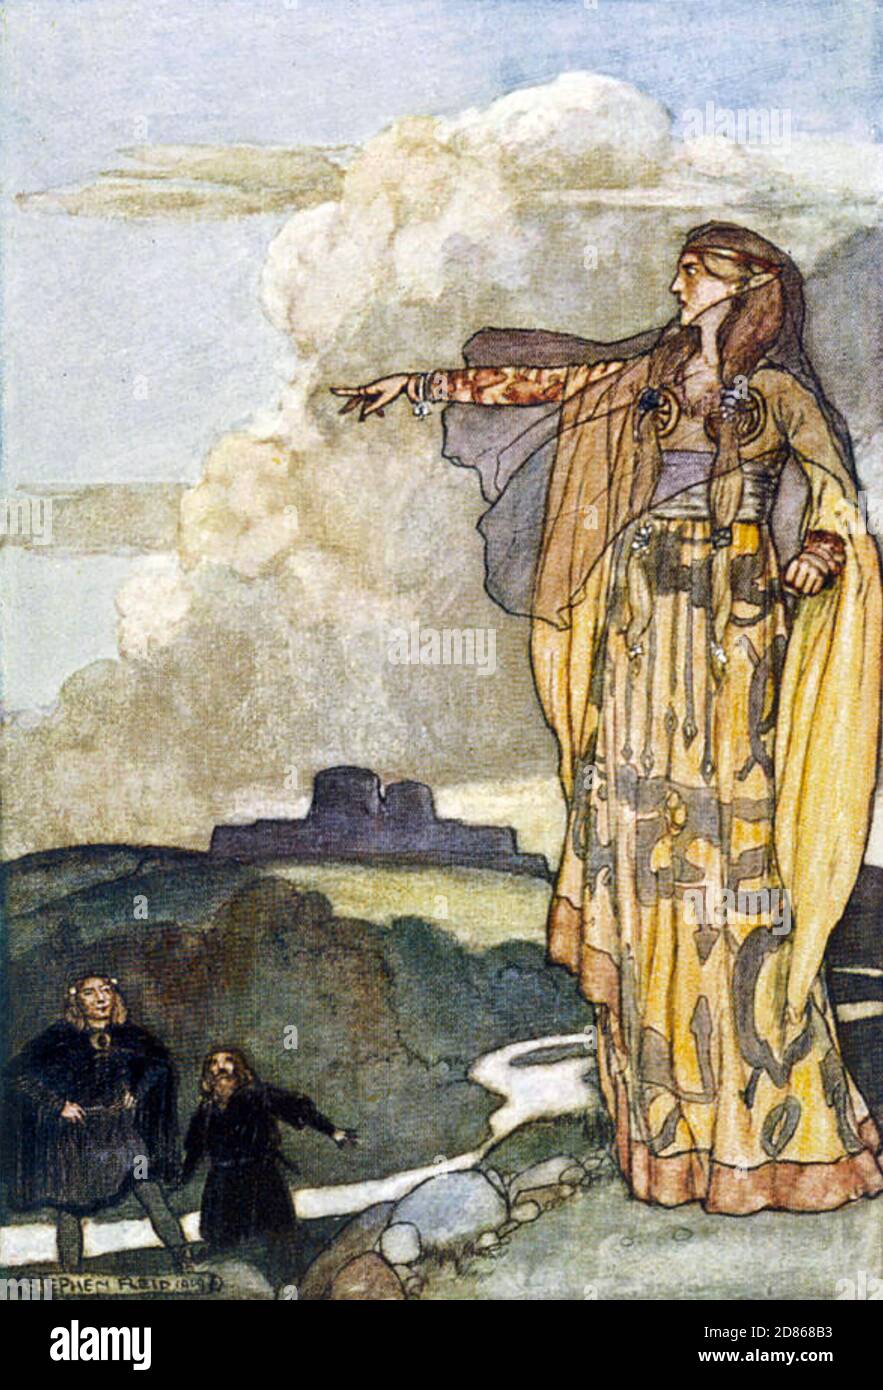 QUEEN MACHA  Figure in Irish folklore here cursing the men of Ulster in an illustration by Stephen Reid for 'The Boys' Cuchulainn' (1904) Stock Photo